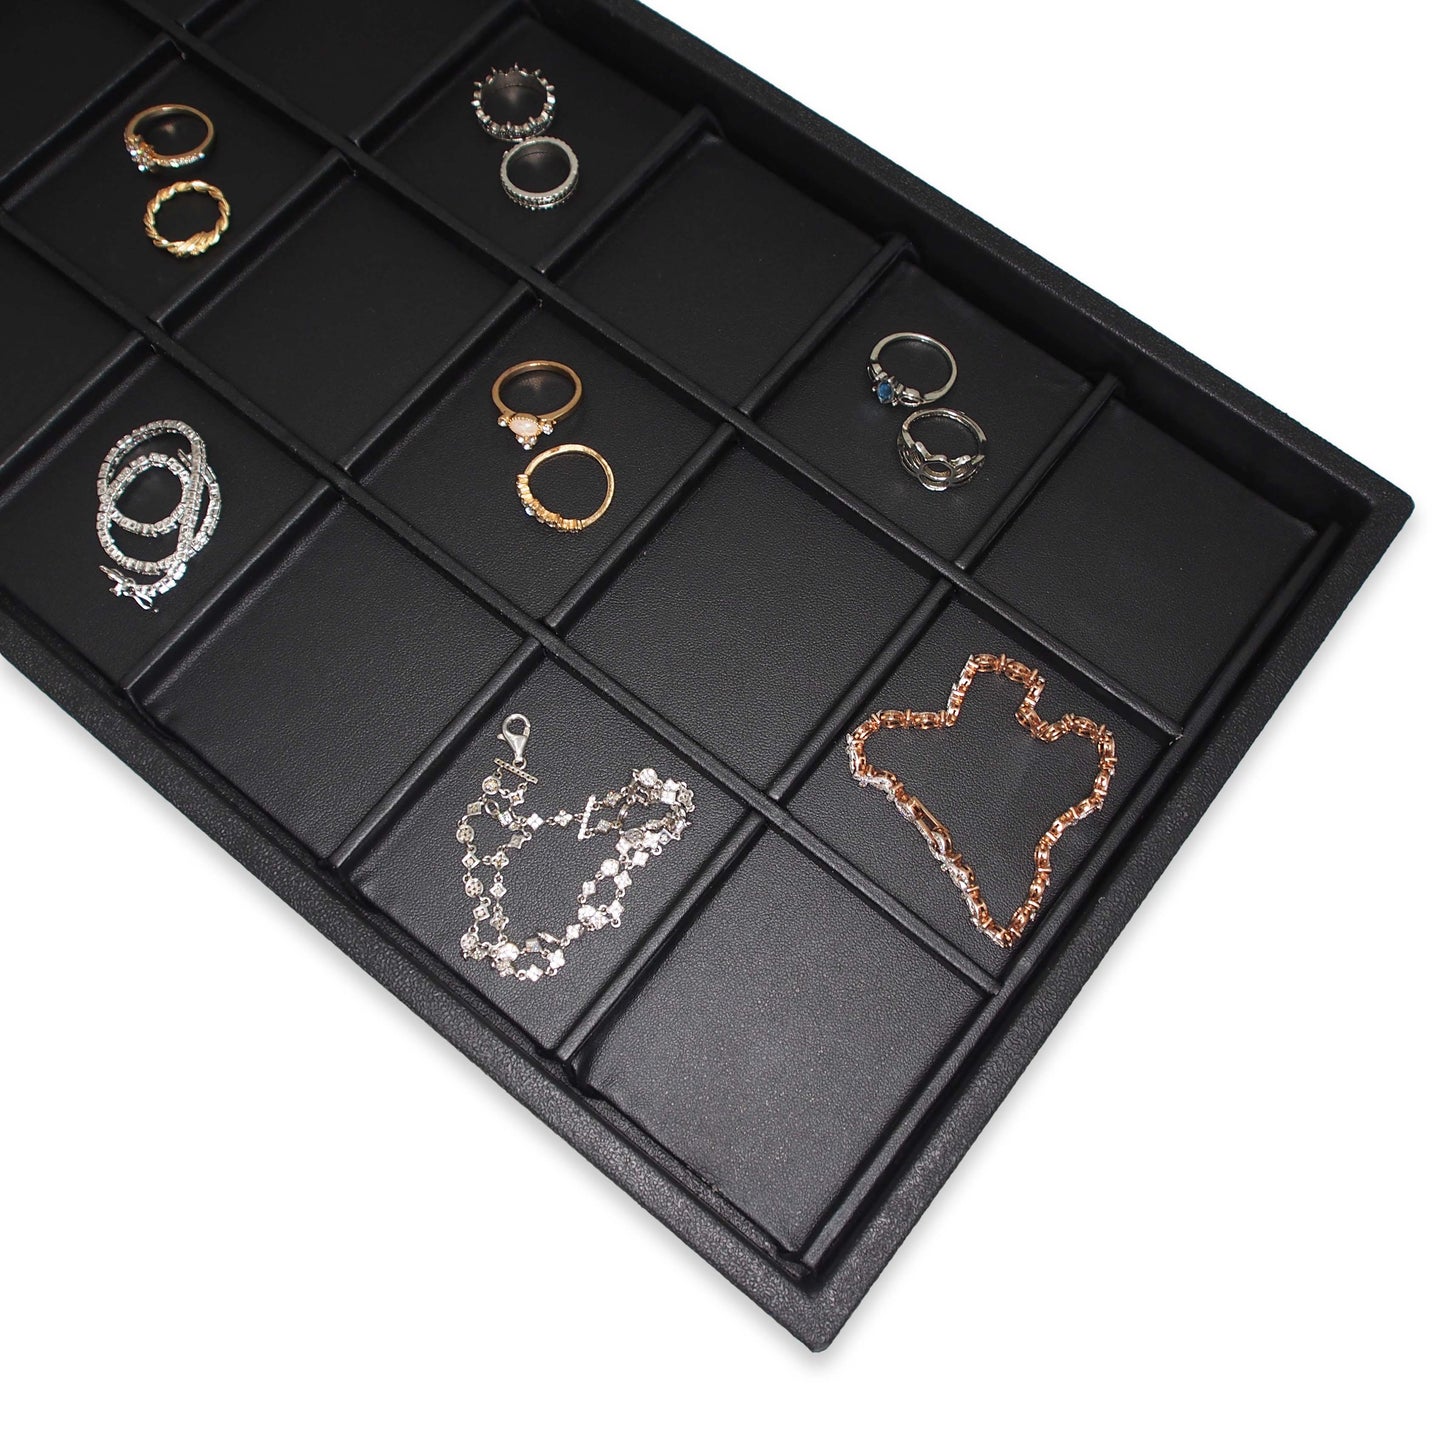 Black 18 Section Deluxe Full Size Jewelry Display Tray Inserts